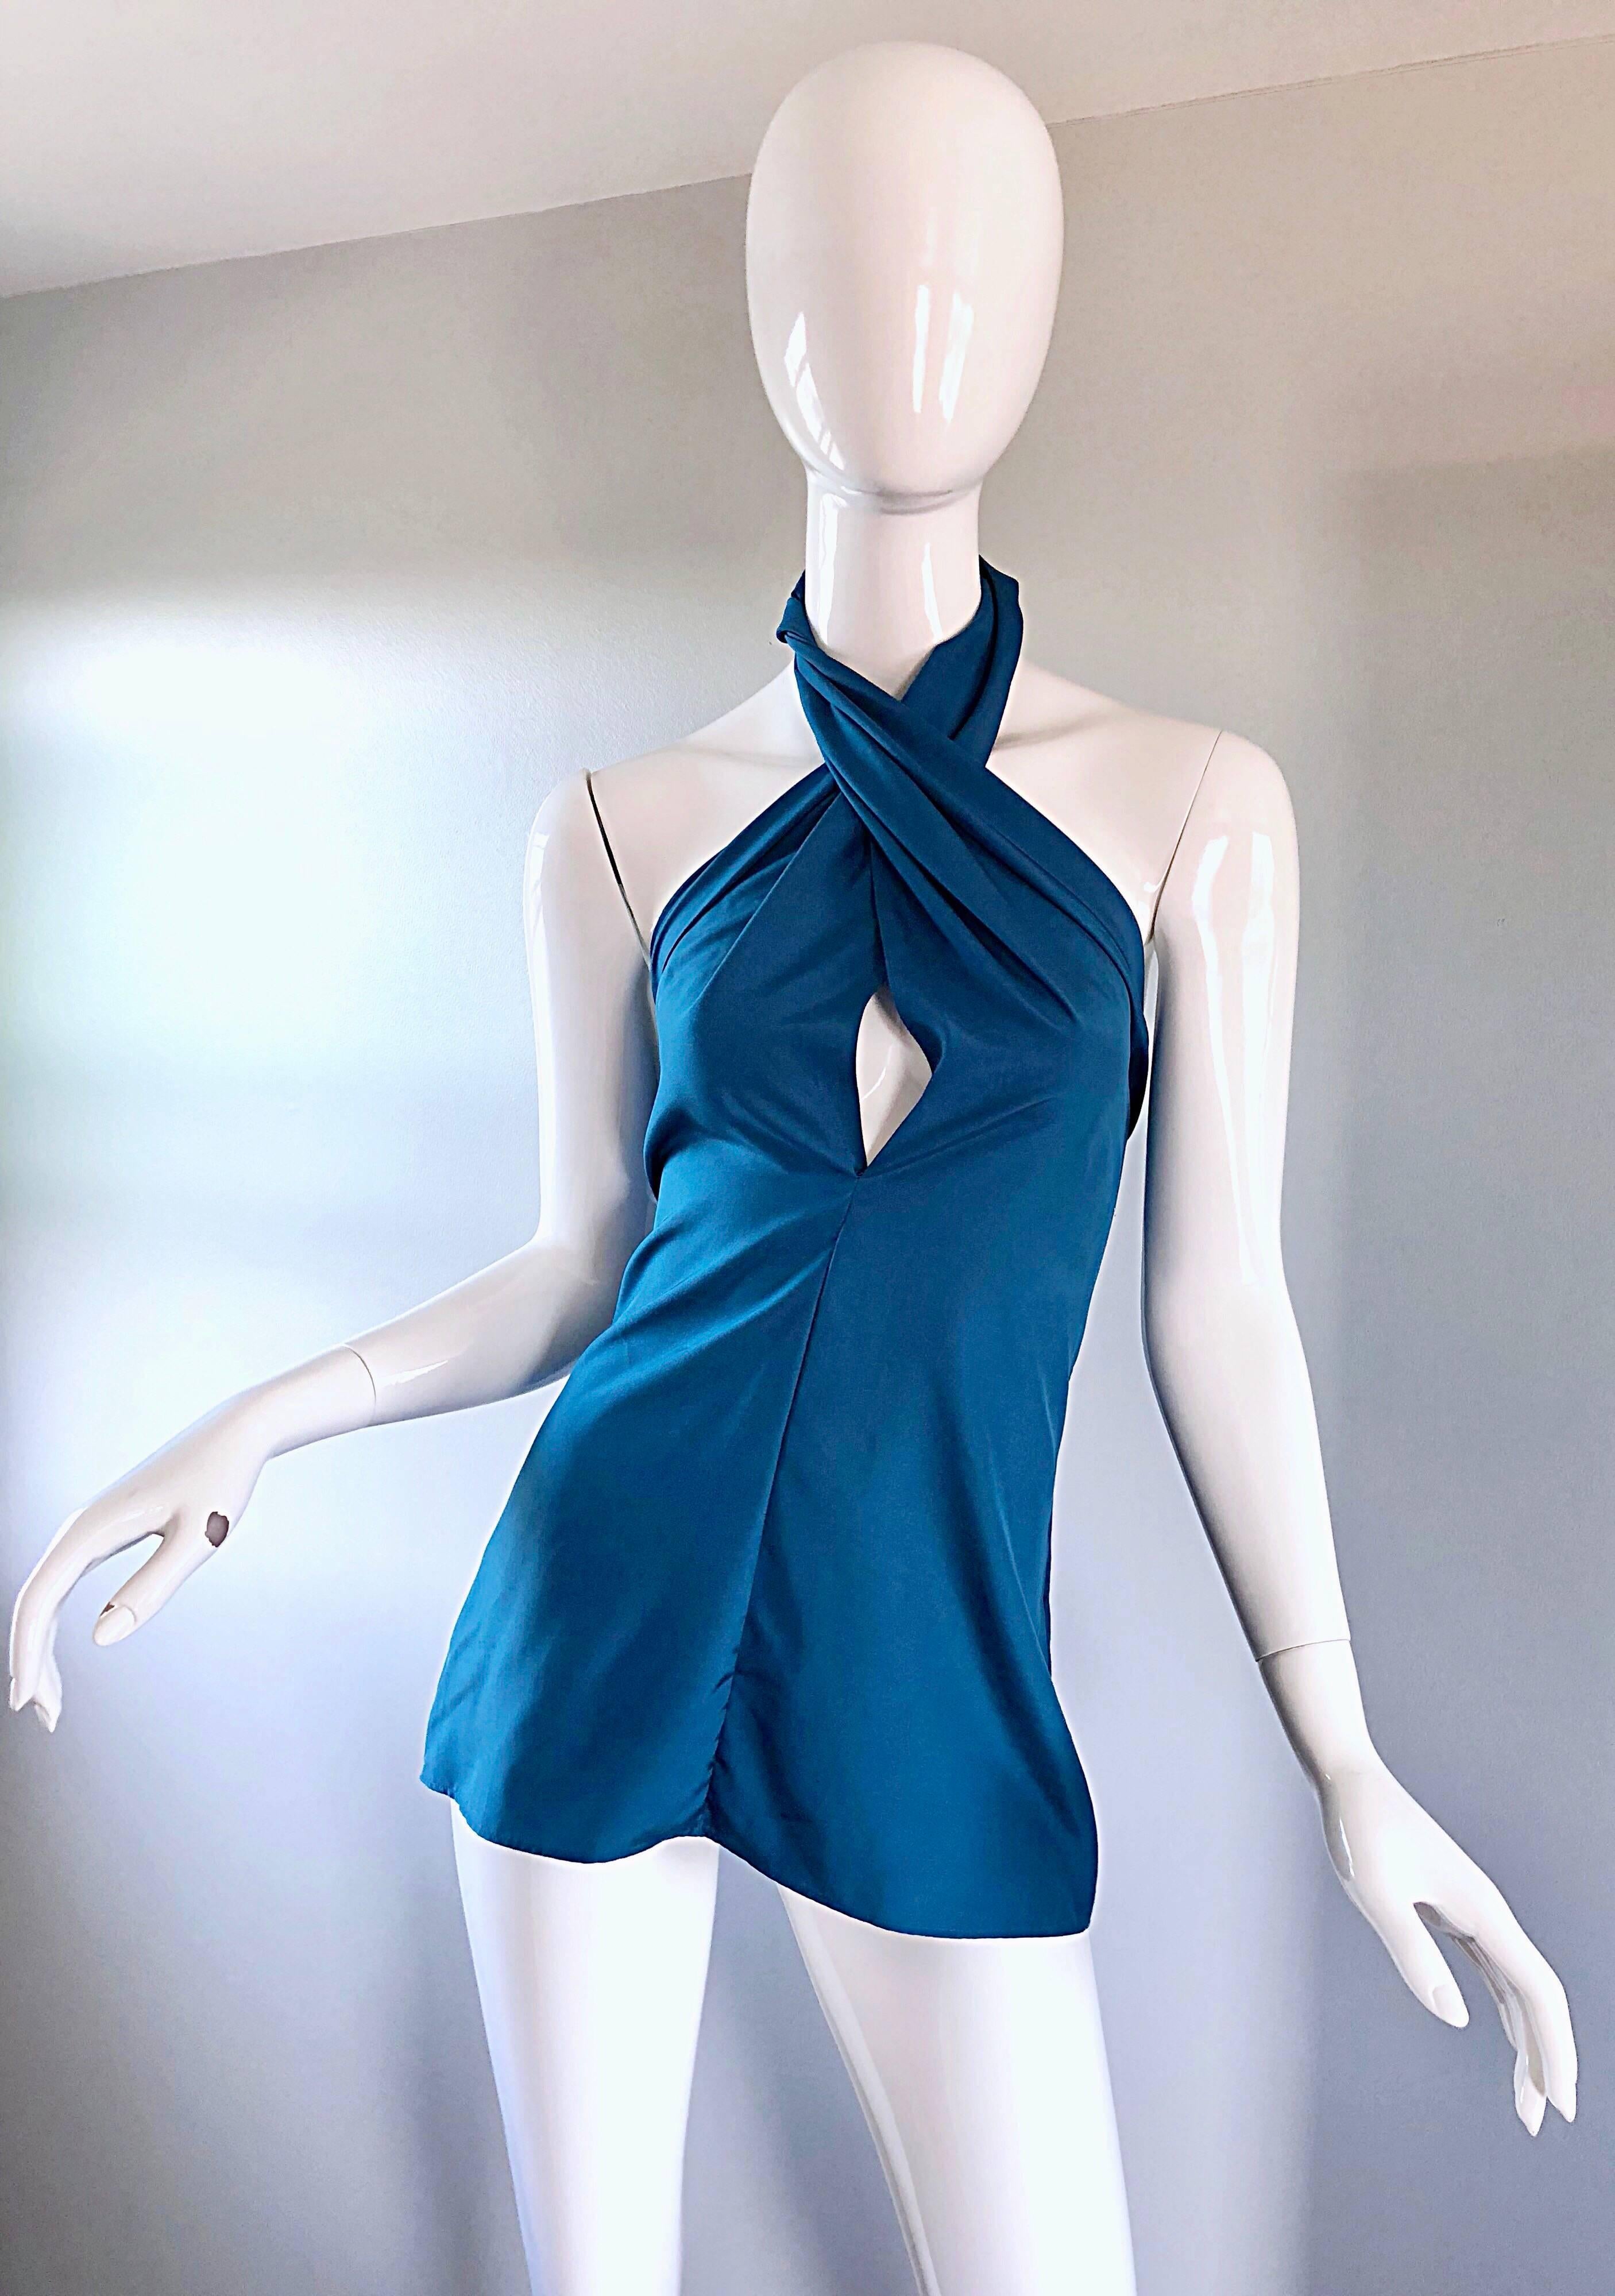 New with tags YVES SAINT LAURENT 'Rive Gauche" Spring / Summer 2012 blue silk halter top! Sexy plunge with a perfectly tailored bodice. Hidden zipper up the side with hook-and-eye closure. Can easily be dressed up or down, belted or alone.